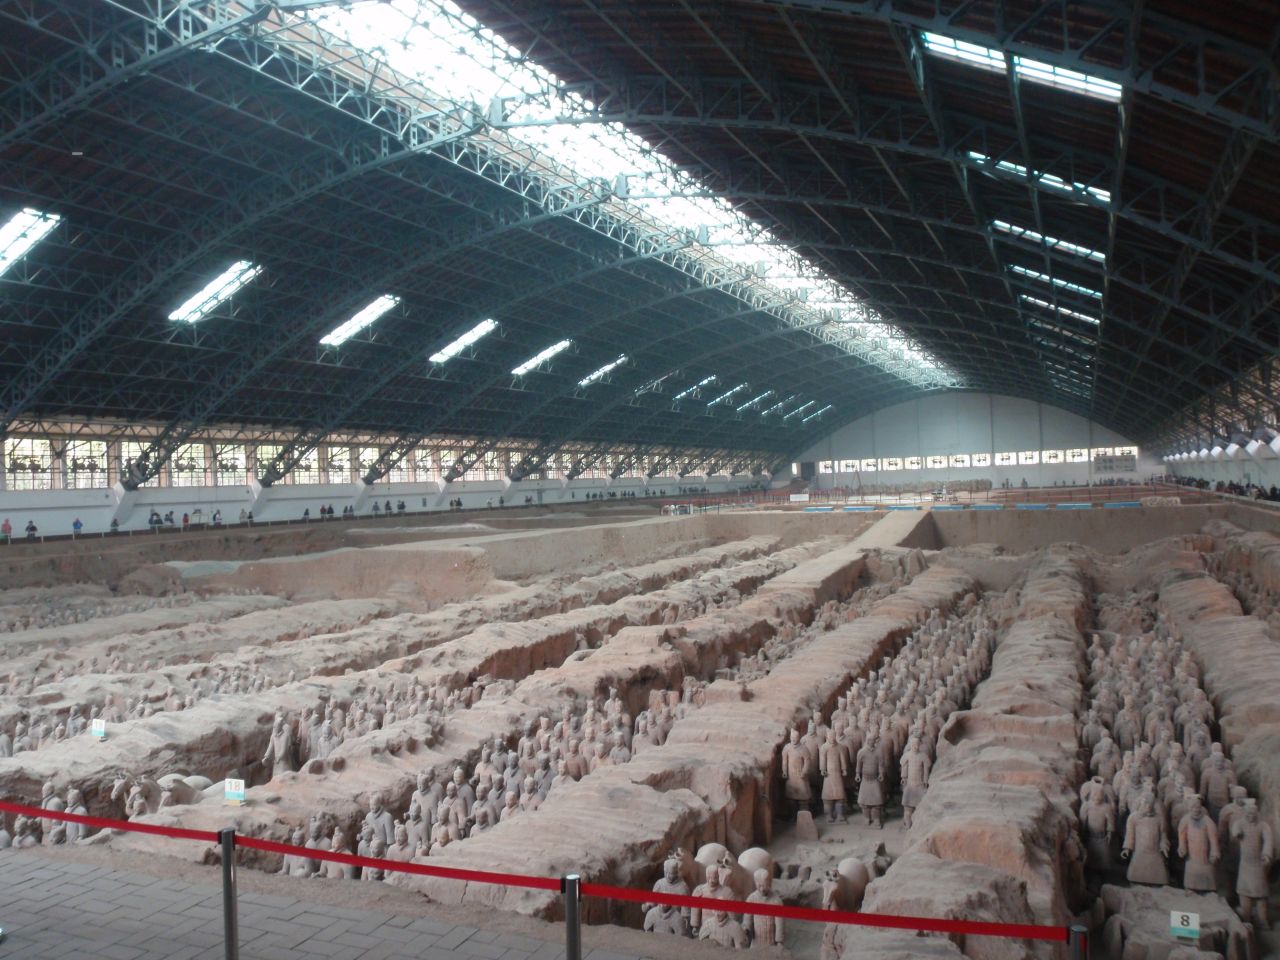 The Museum of Qin Terra-Cotta Warriors and Horses in Xi¹an, China, houses an amazing army of ancient figures.